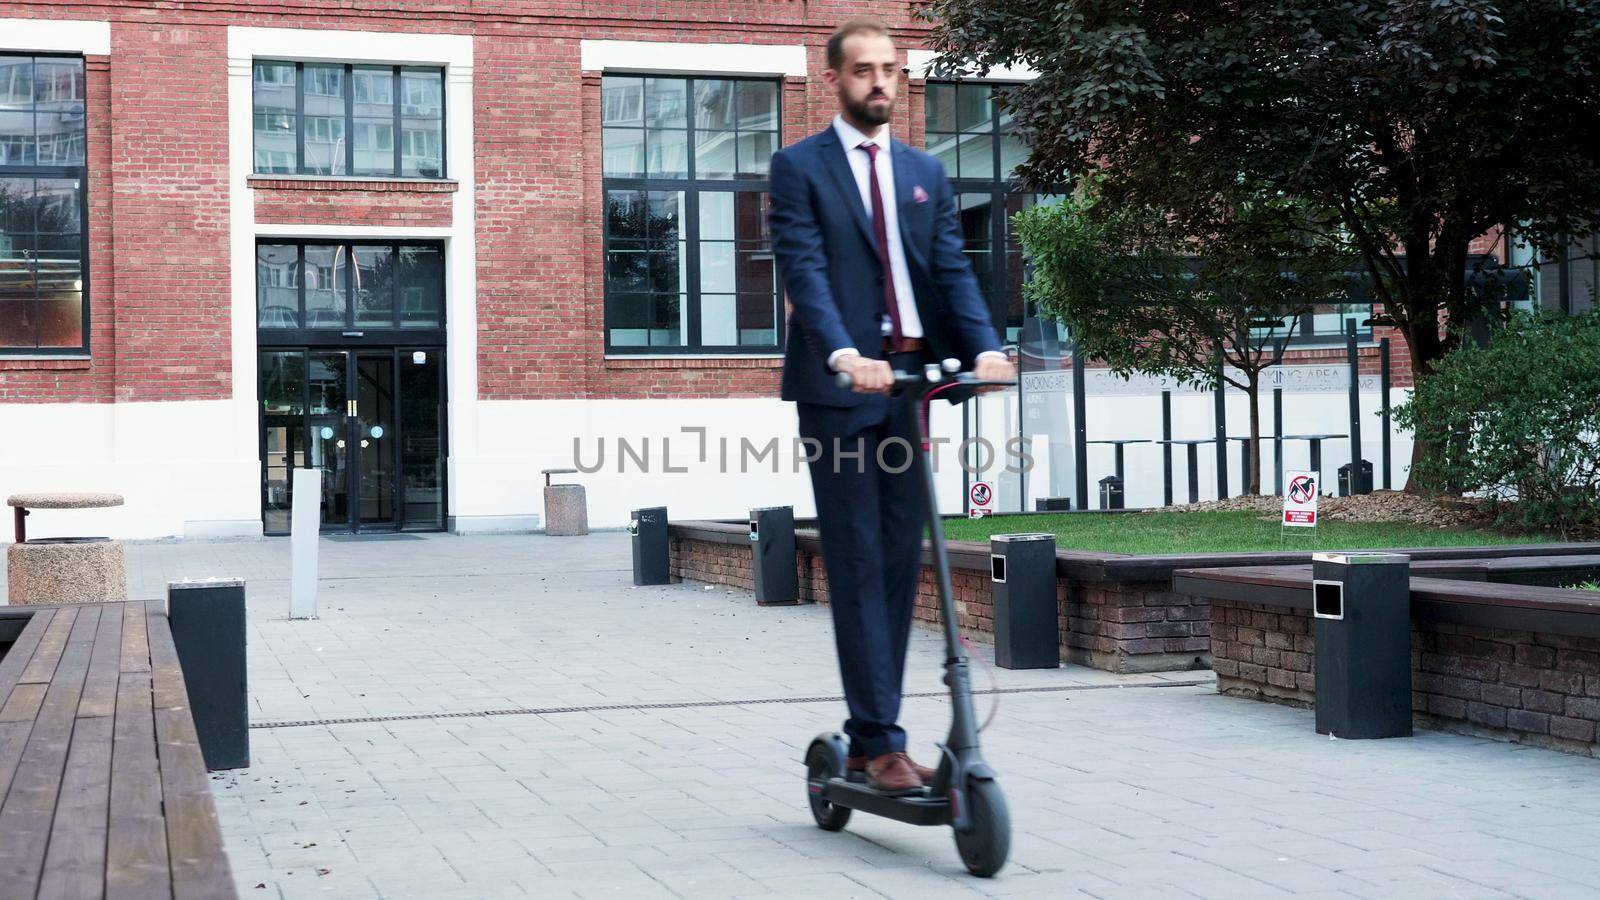 Executive manager in diplomatic suit riding on electric scooter in front of startup business company by DCStudio